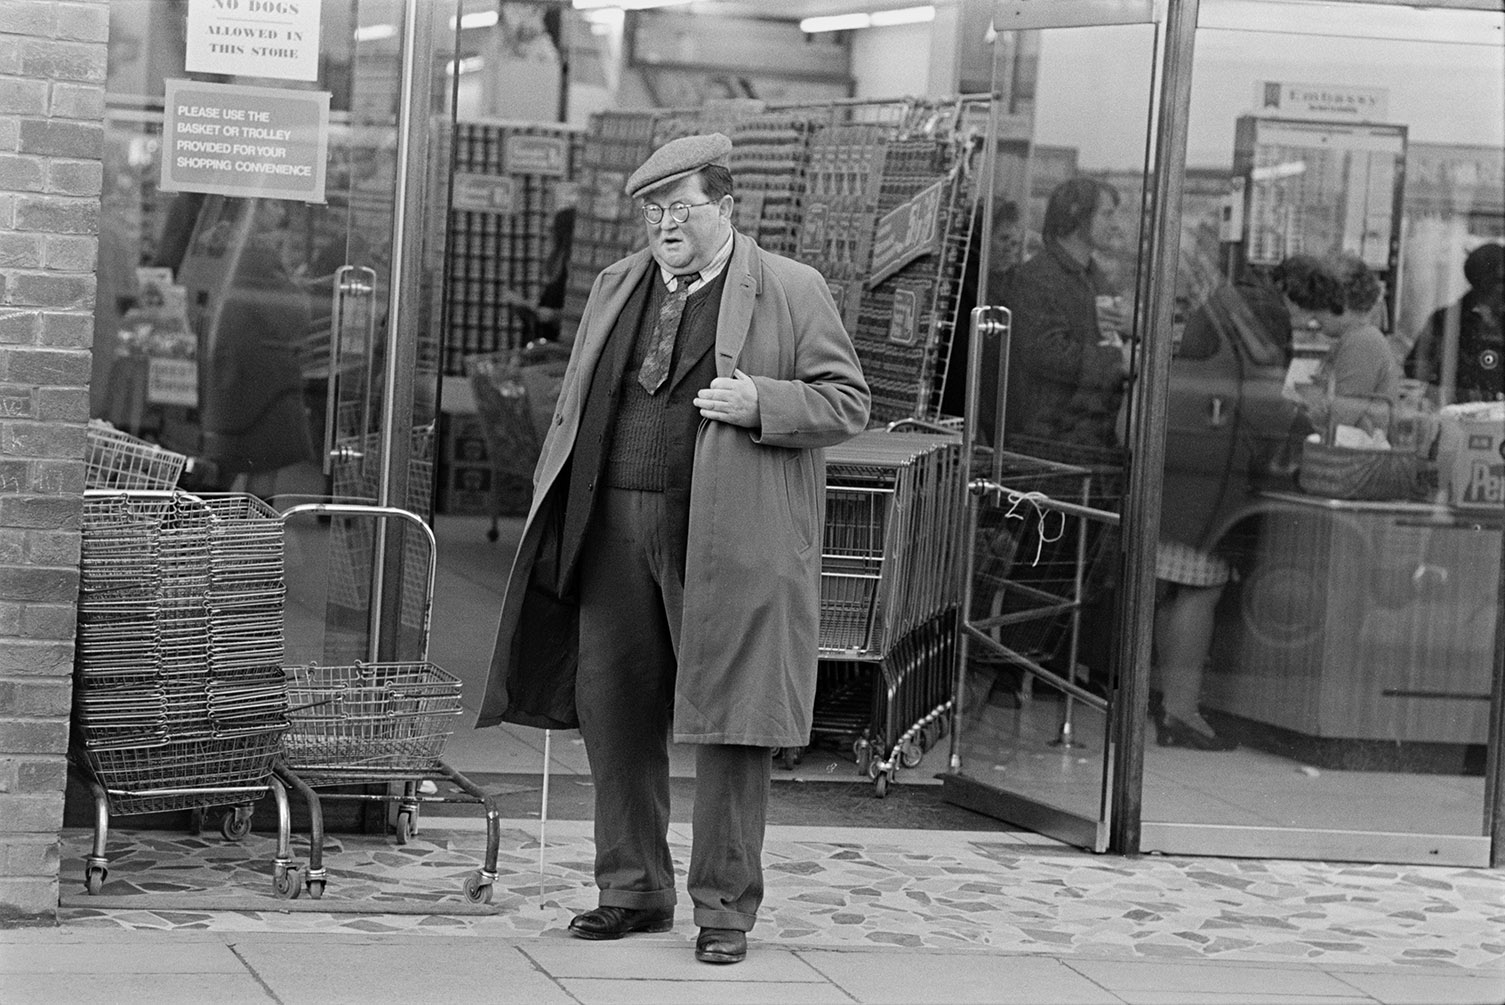 A man leaving a supermarket in Barnstaple. Shopping baskets are stacked outside the shop front.